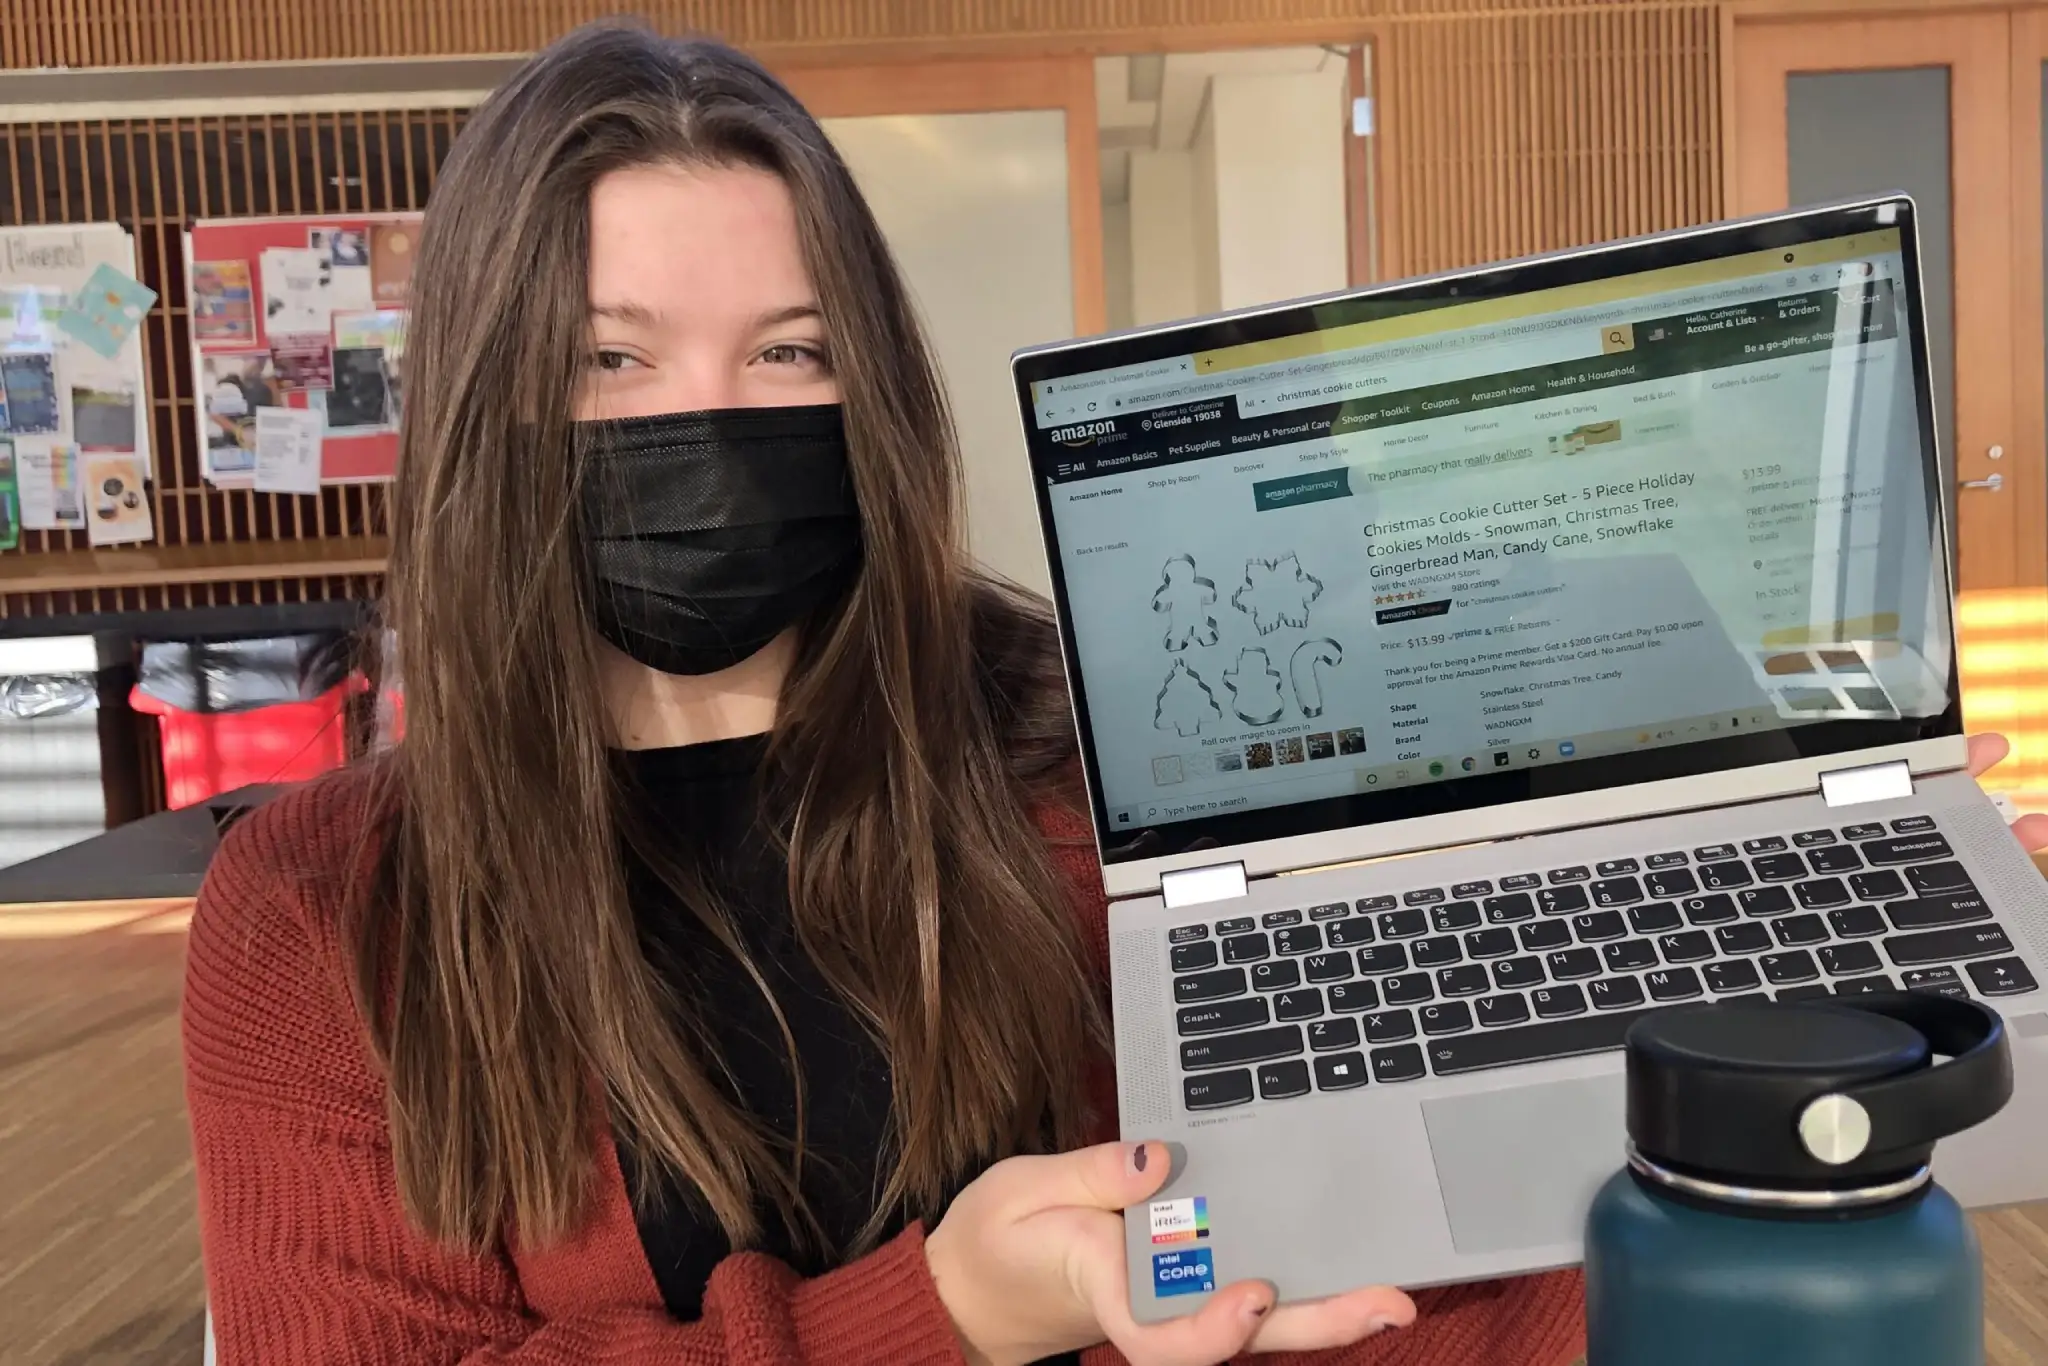 Student in face mask holding up laptop with internet browser open